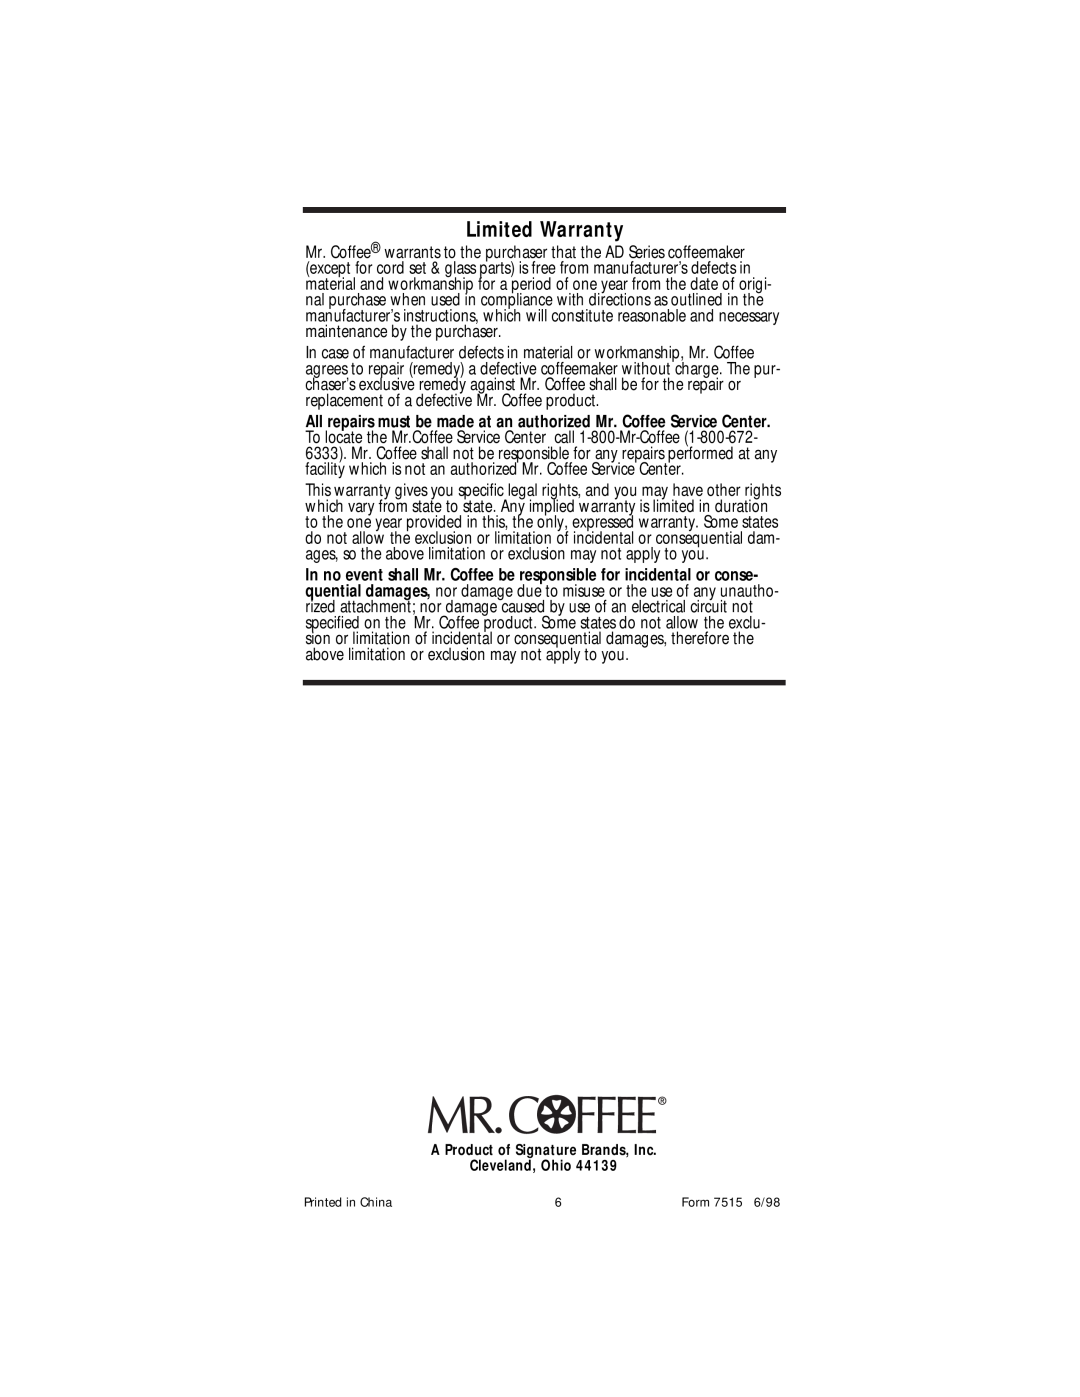 Mr. Coffee AD SERIES operating instructions Limited Warranty, A Product of Signature Brands, Inc, Cleveland, Ohio 